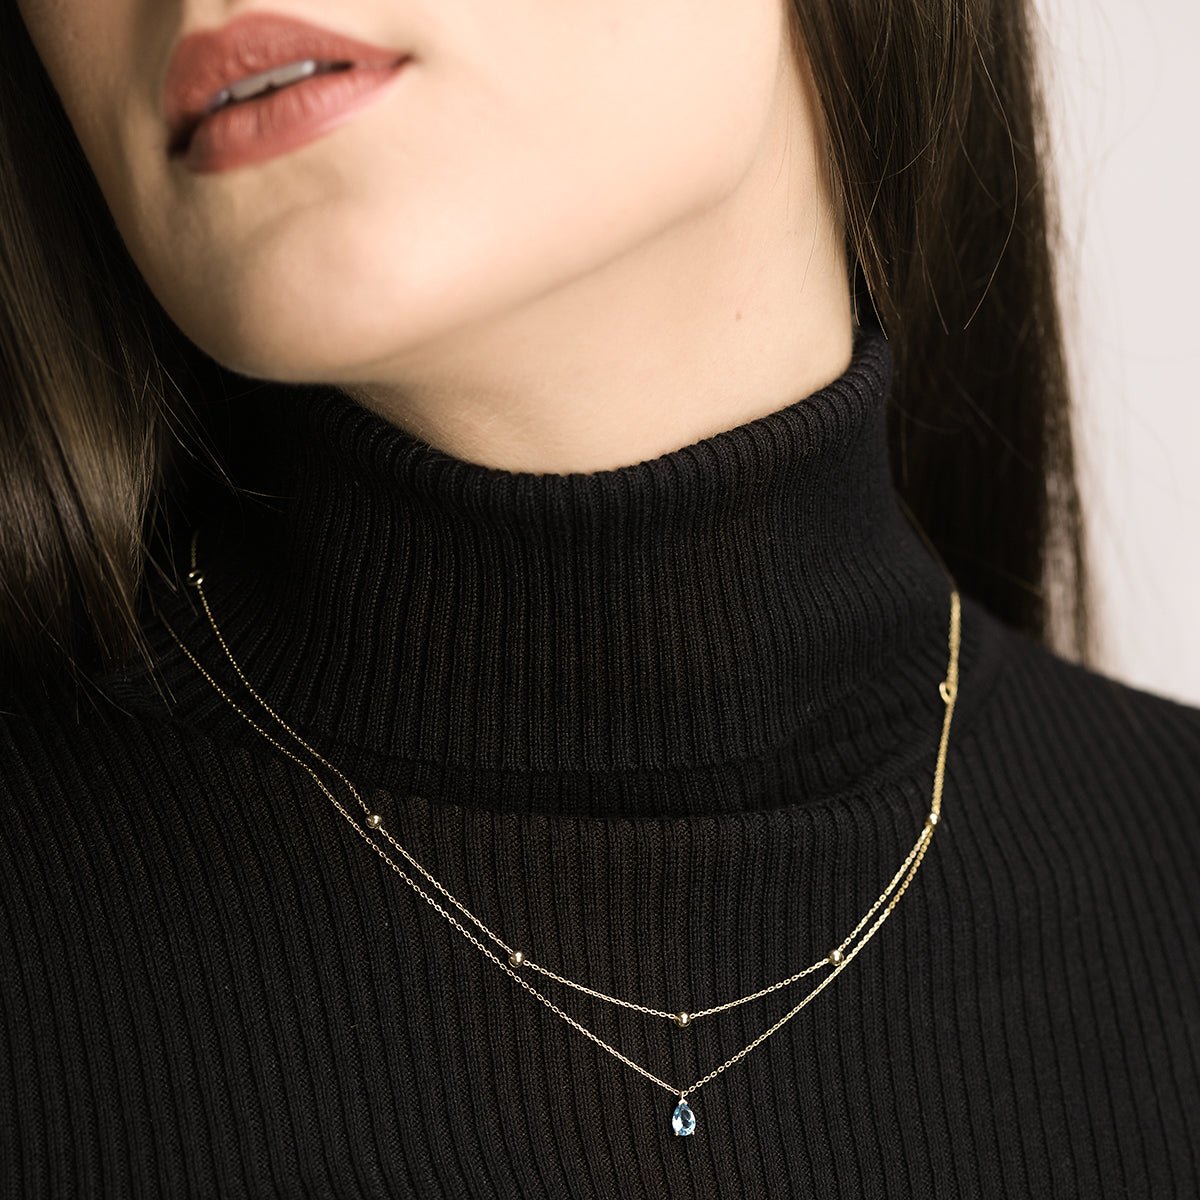 Beaded Station Necklace Necklaces Estella Collection #product_description# 17821 14k Layering Necklace Make Collection #tag4# #tag5# #tag6# #tag7# #tag8# #tag9# #tag10# 14K Yellow Gold 18"